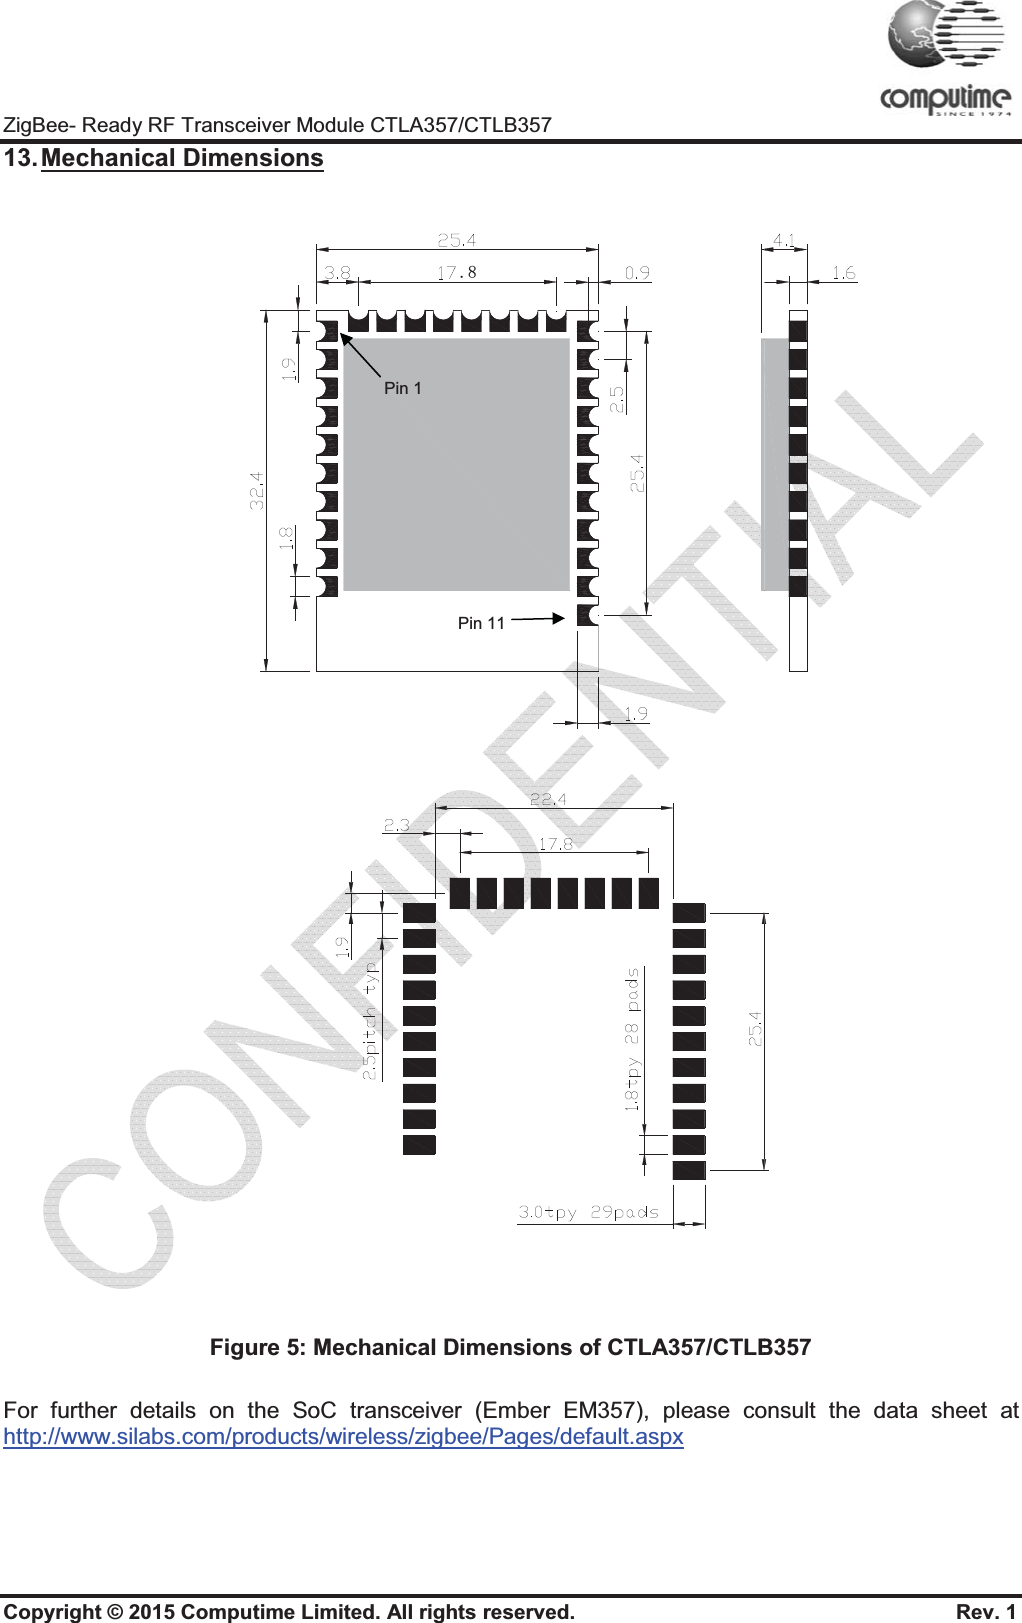 ZigBee- Ready RF Transceiver MoCopyright © 2015 Computime Li13. Mechanical  DimensionsFigure 5: MFor further details on the Sohttp://www.silabs.com/productsodule CTLA357/CTLB357 imited. All rights reserved.                     sMechanical Dimensions of CTLA357/CTLBoC transceiver (Ember EM357), please cos/wireless/zigbee/Pages/default.aspxPin 1 Pin 11                                  Rev. 1 B357onsult the data sheet at 